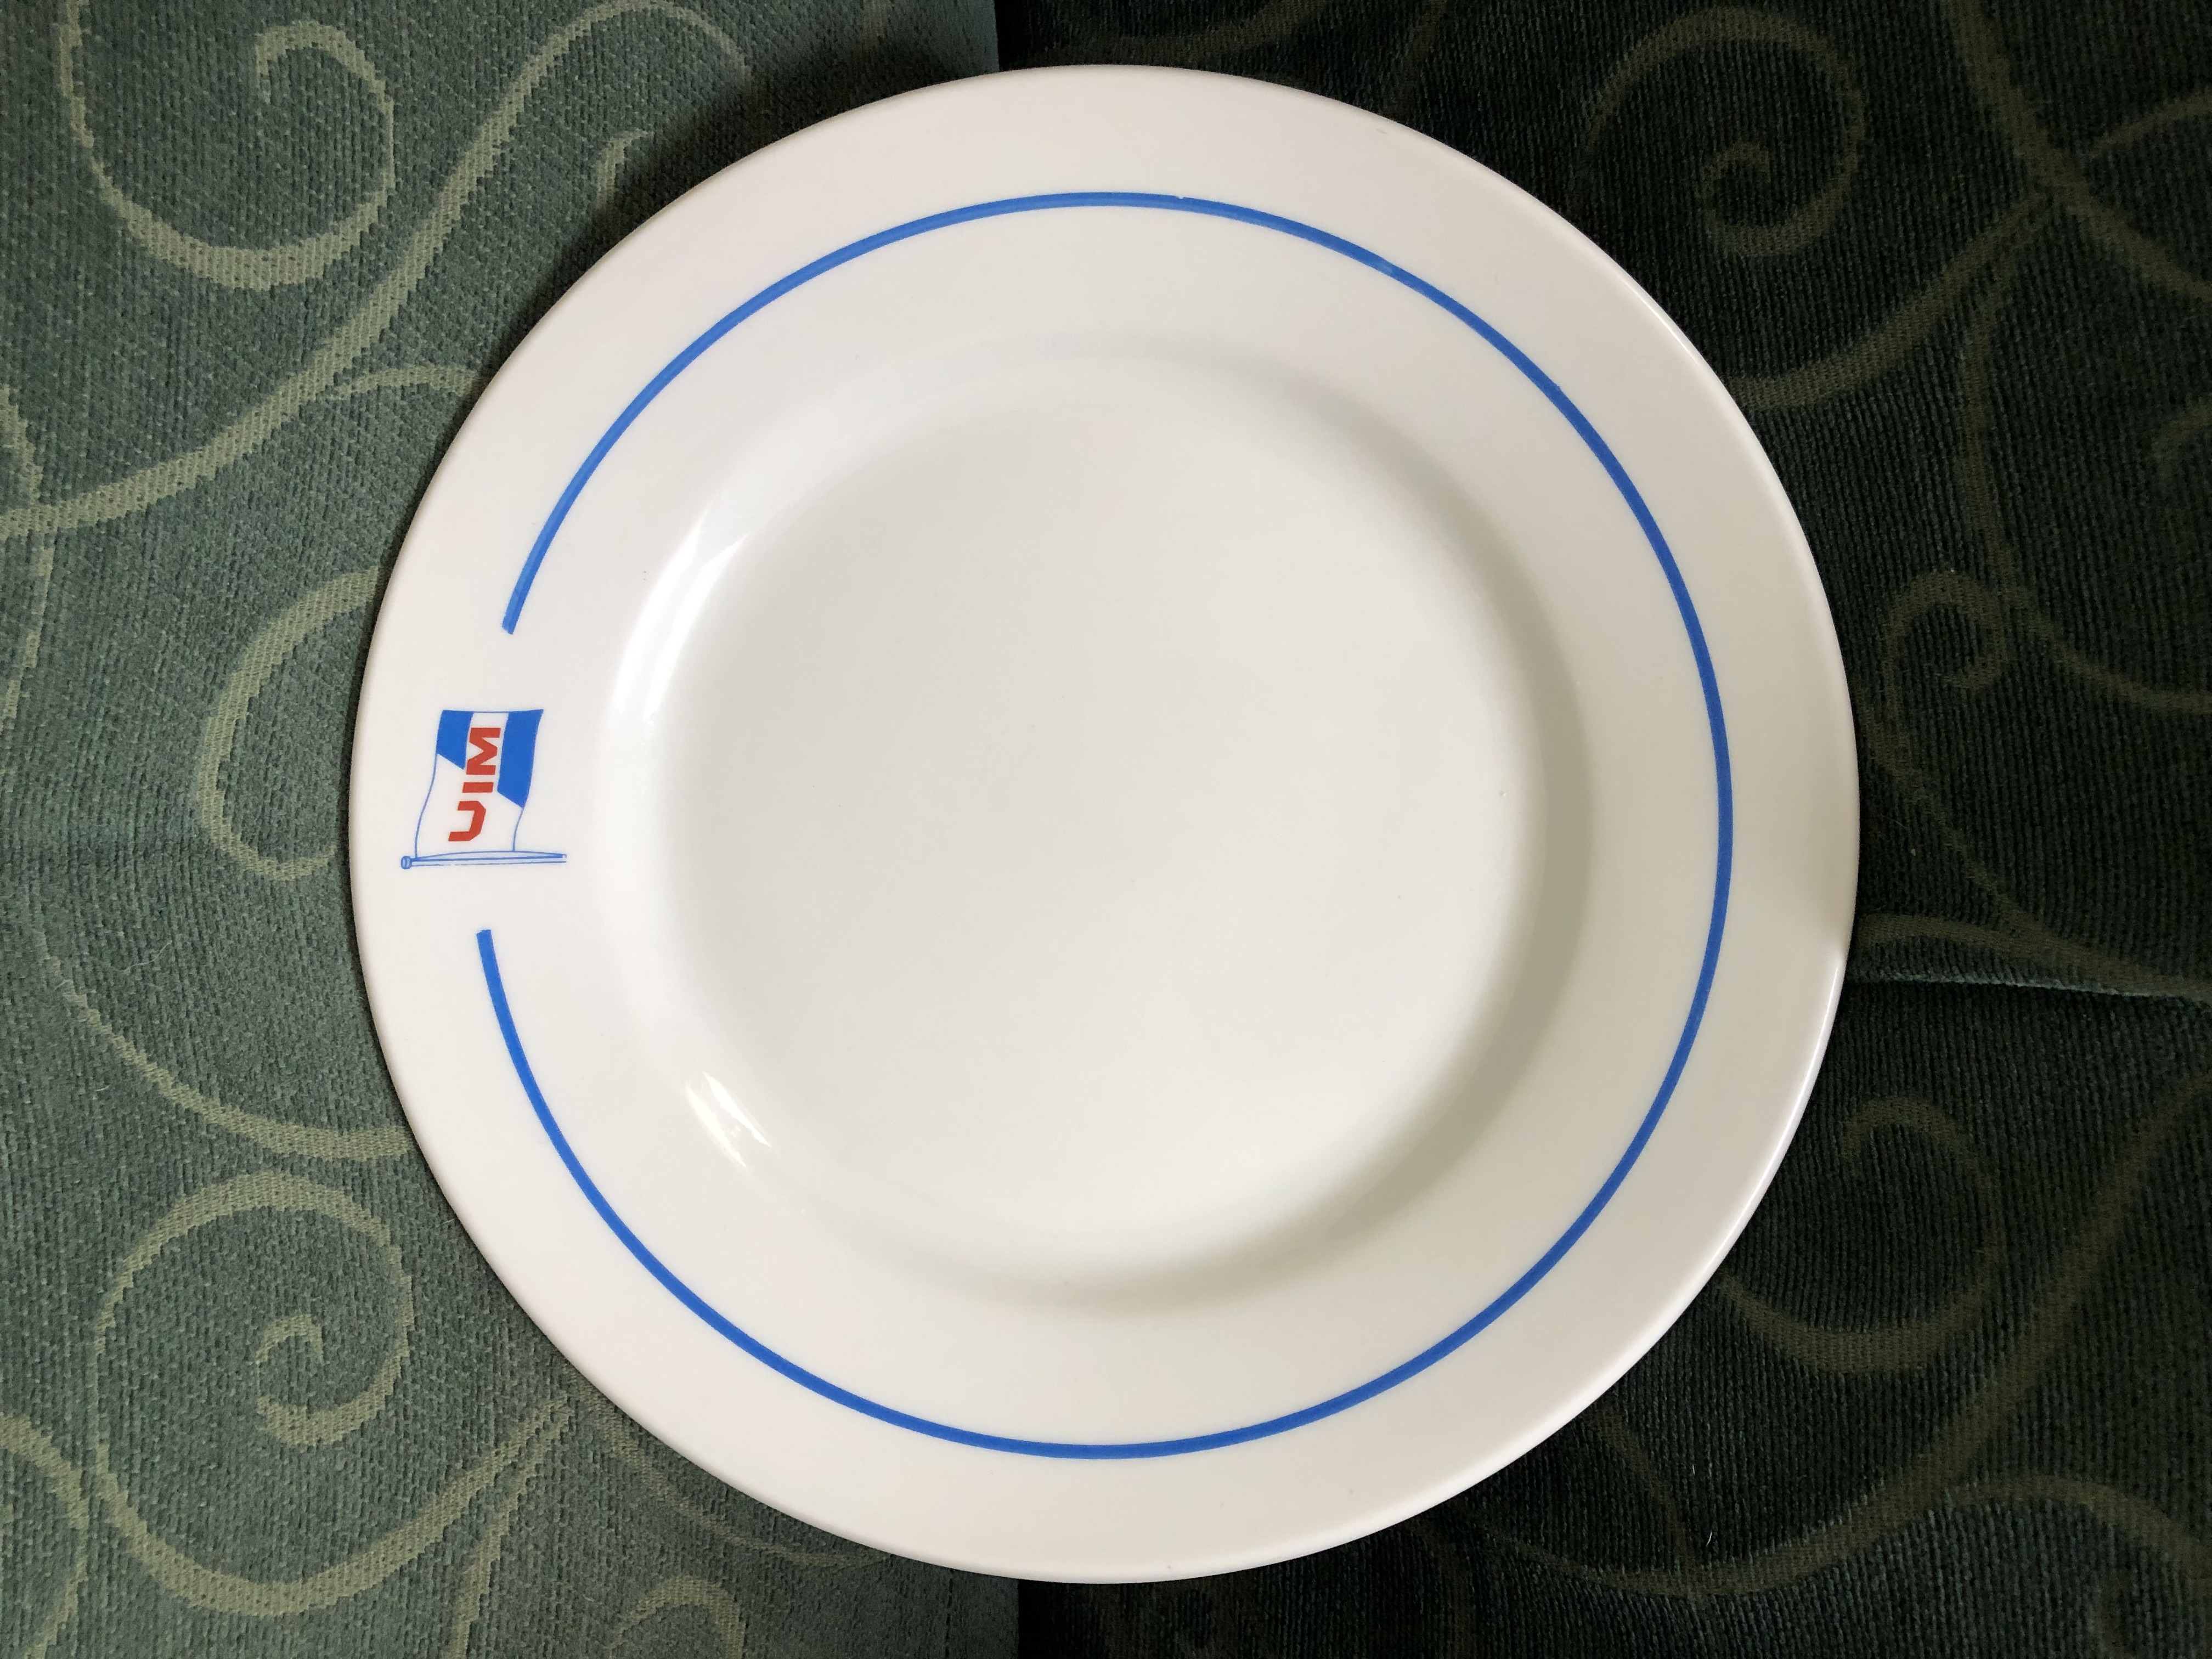 EXTRA LARGE SIZE PLATE FROM THE UNITED INTERNATIONAL MARINE SHIPPING COMPANY